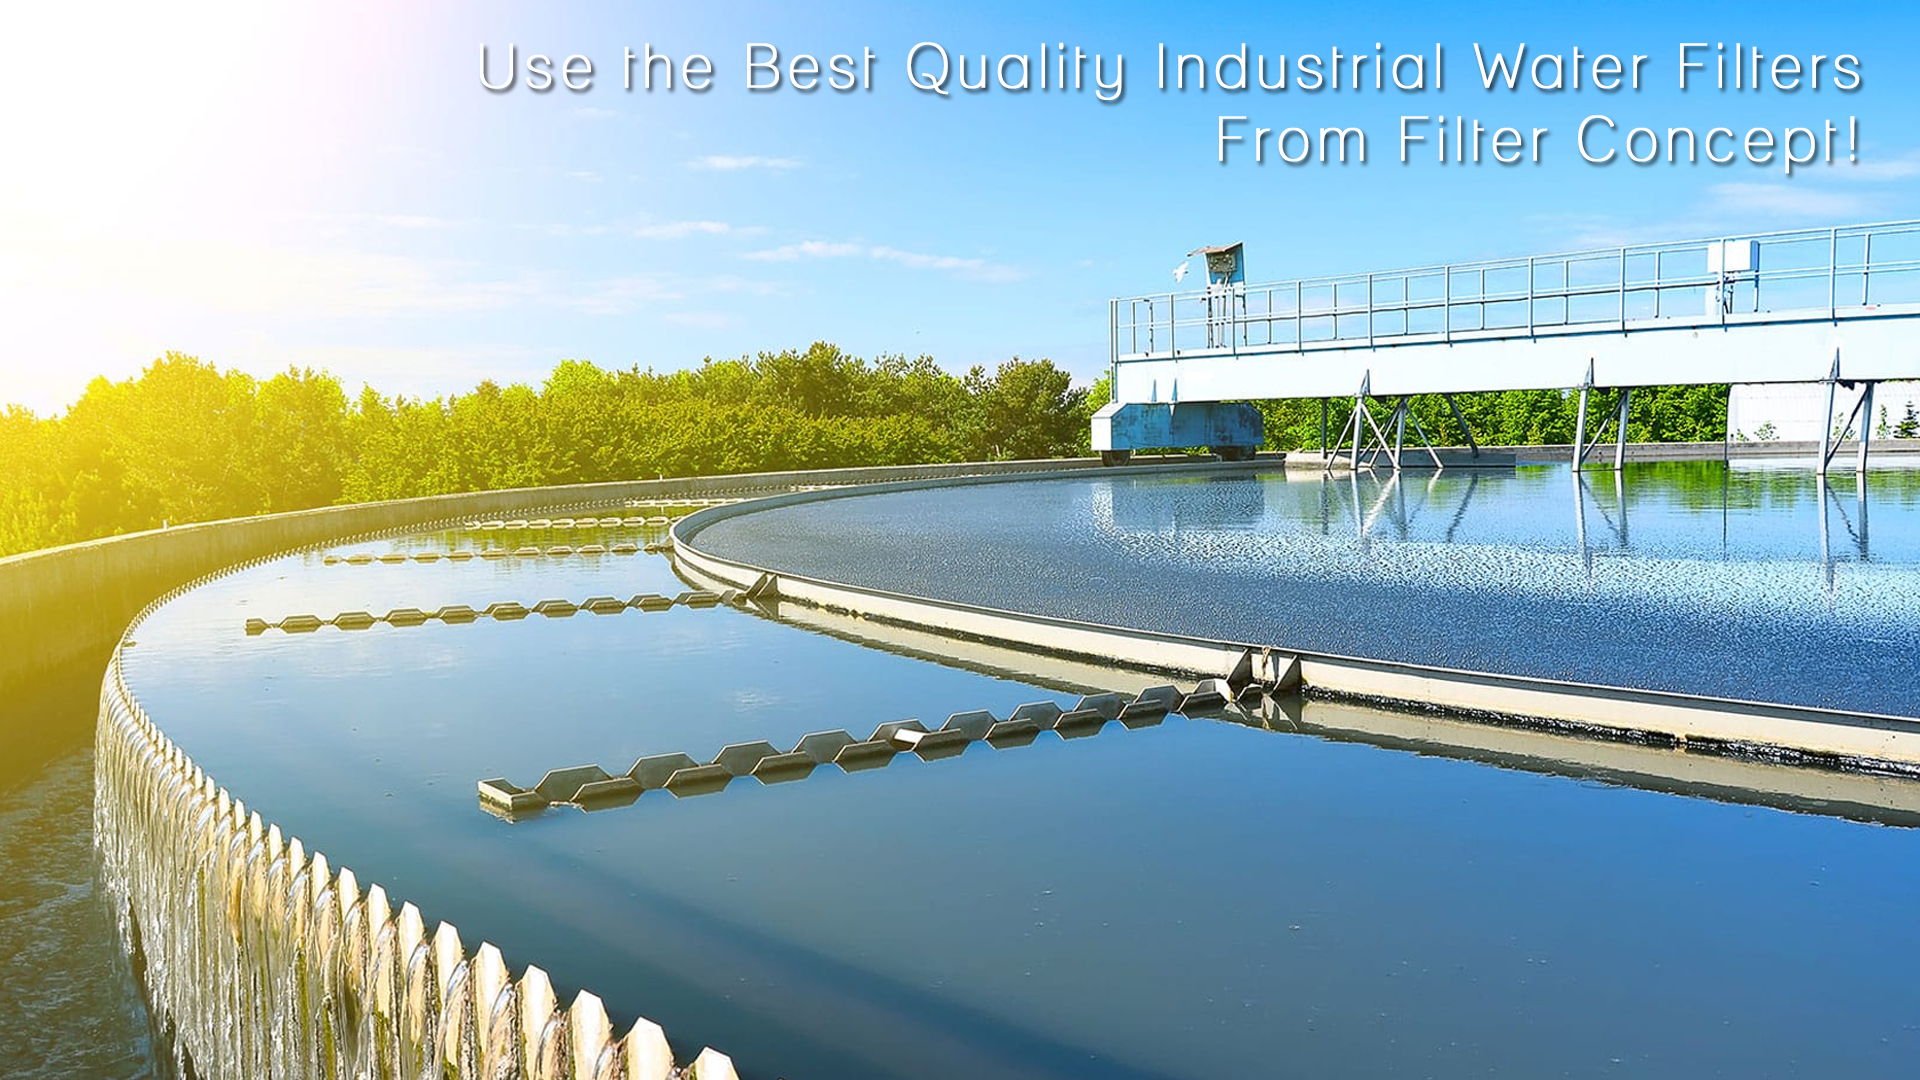 Use the Best Quality Industrial Water Filters From Filter Concept !